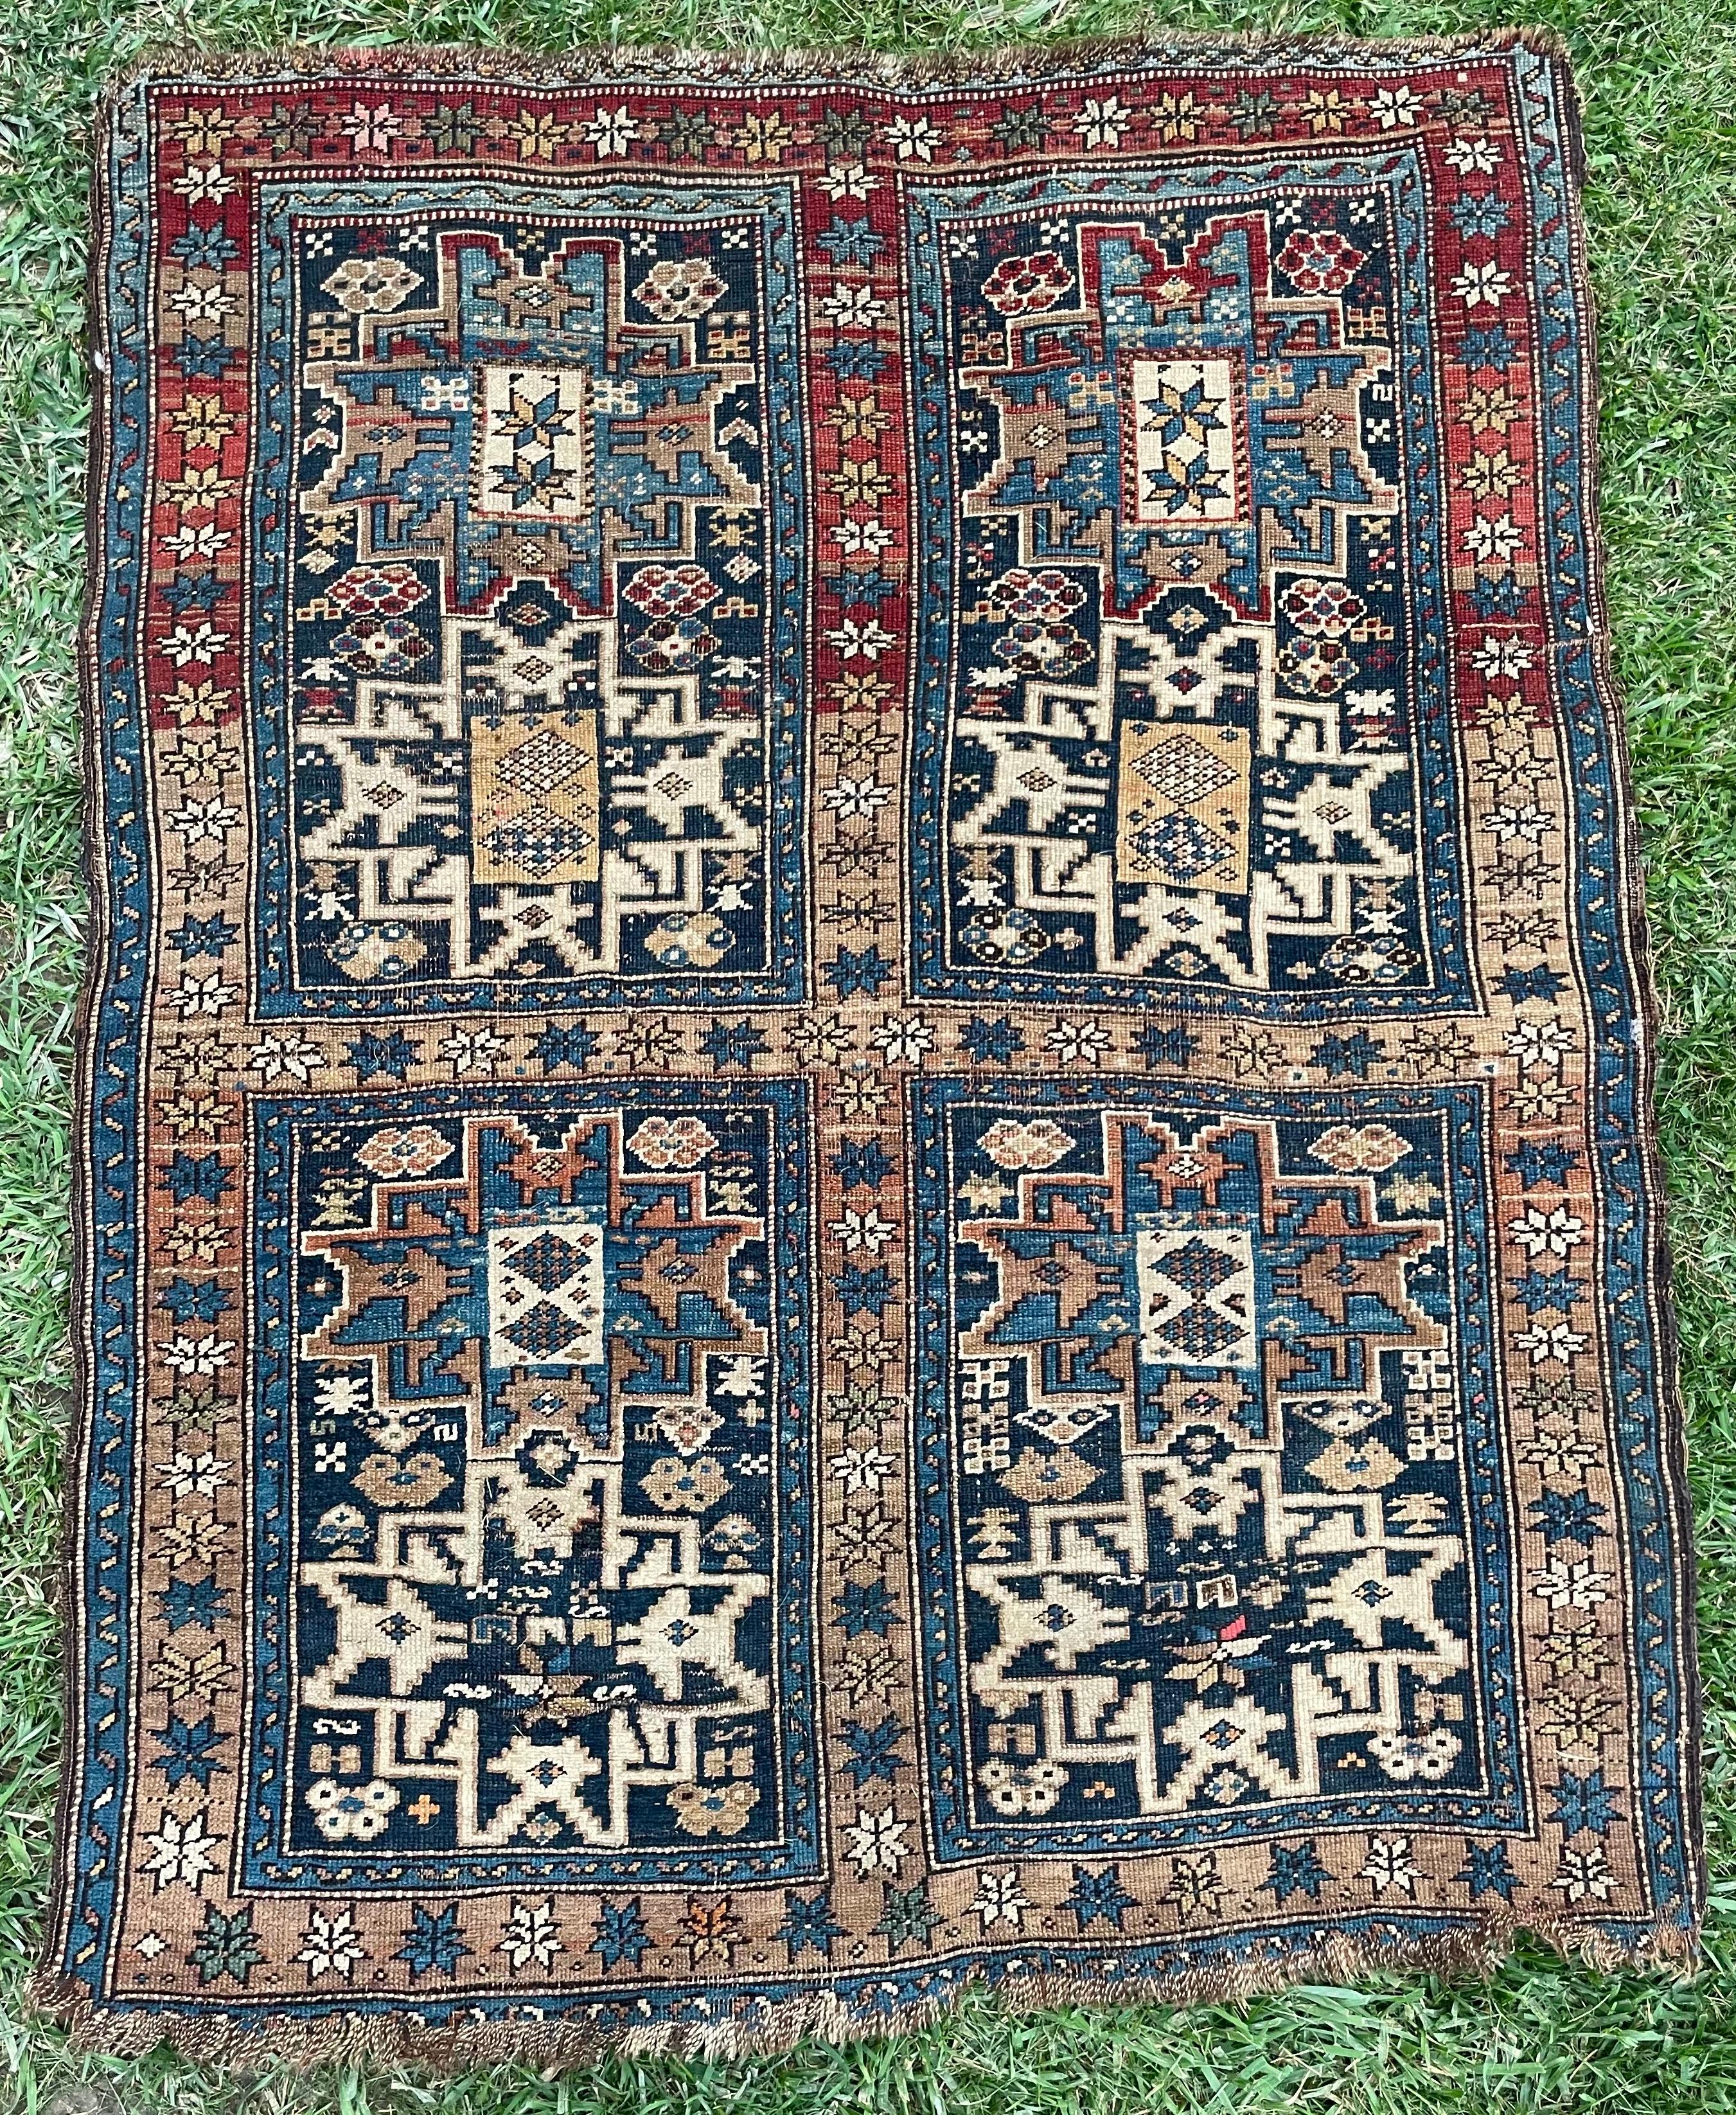 Rare Quad Section Duel Leshgi Star Medallions Caucasian Antique Rug

Size: 3.8 x 4.8
Age: Antique
Pile: Low with some patina

This rug is one-of-a-kind, only one in the world, no others are available.

Because of the nature and age of these